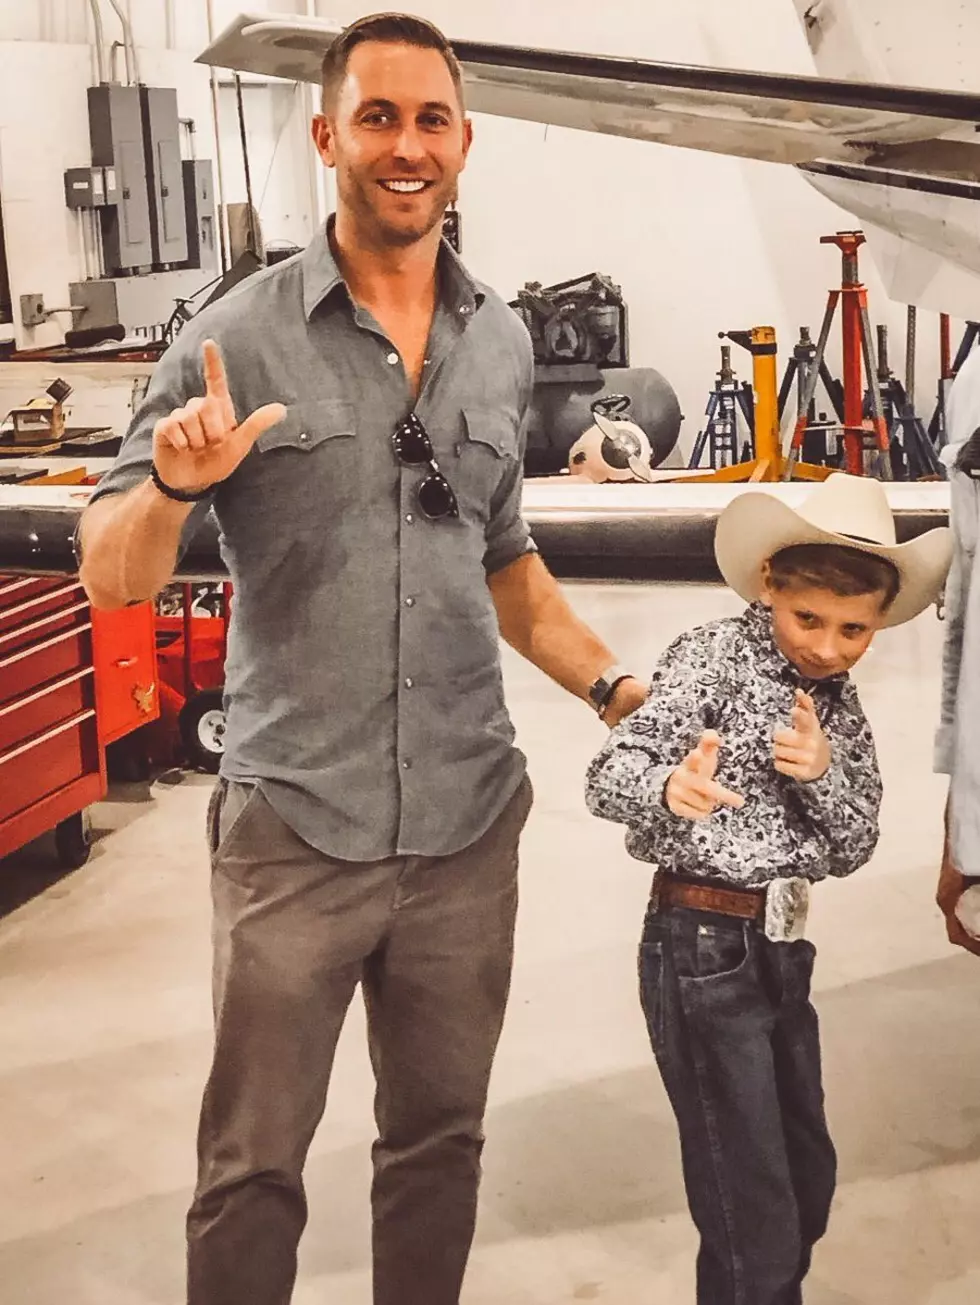 Kliff Kingsbury Gets a Picture With the Walmart Yodeling Kid